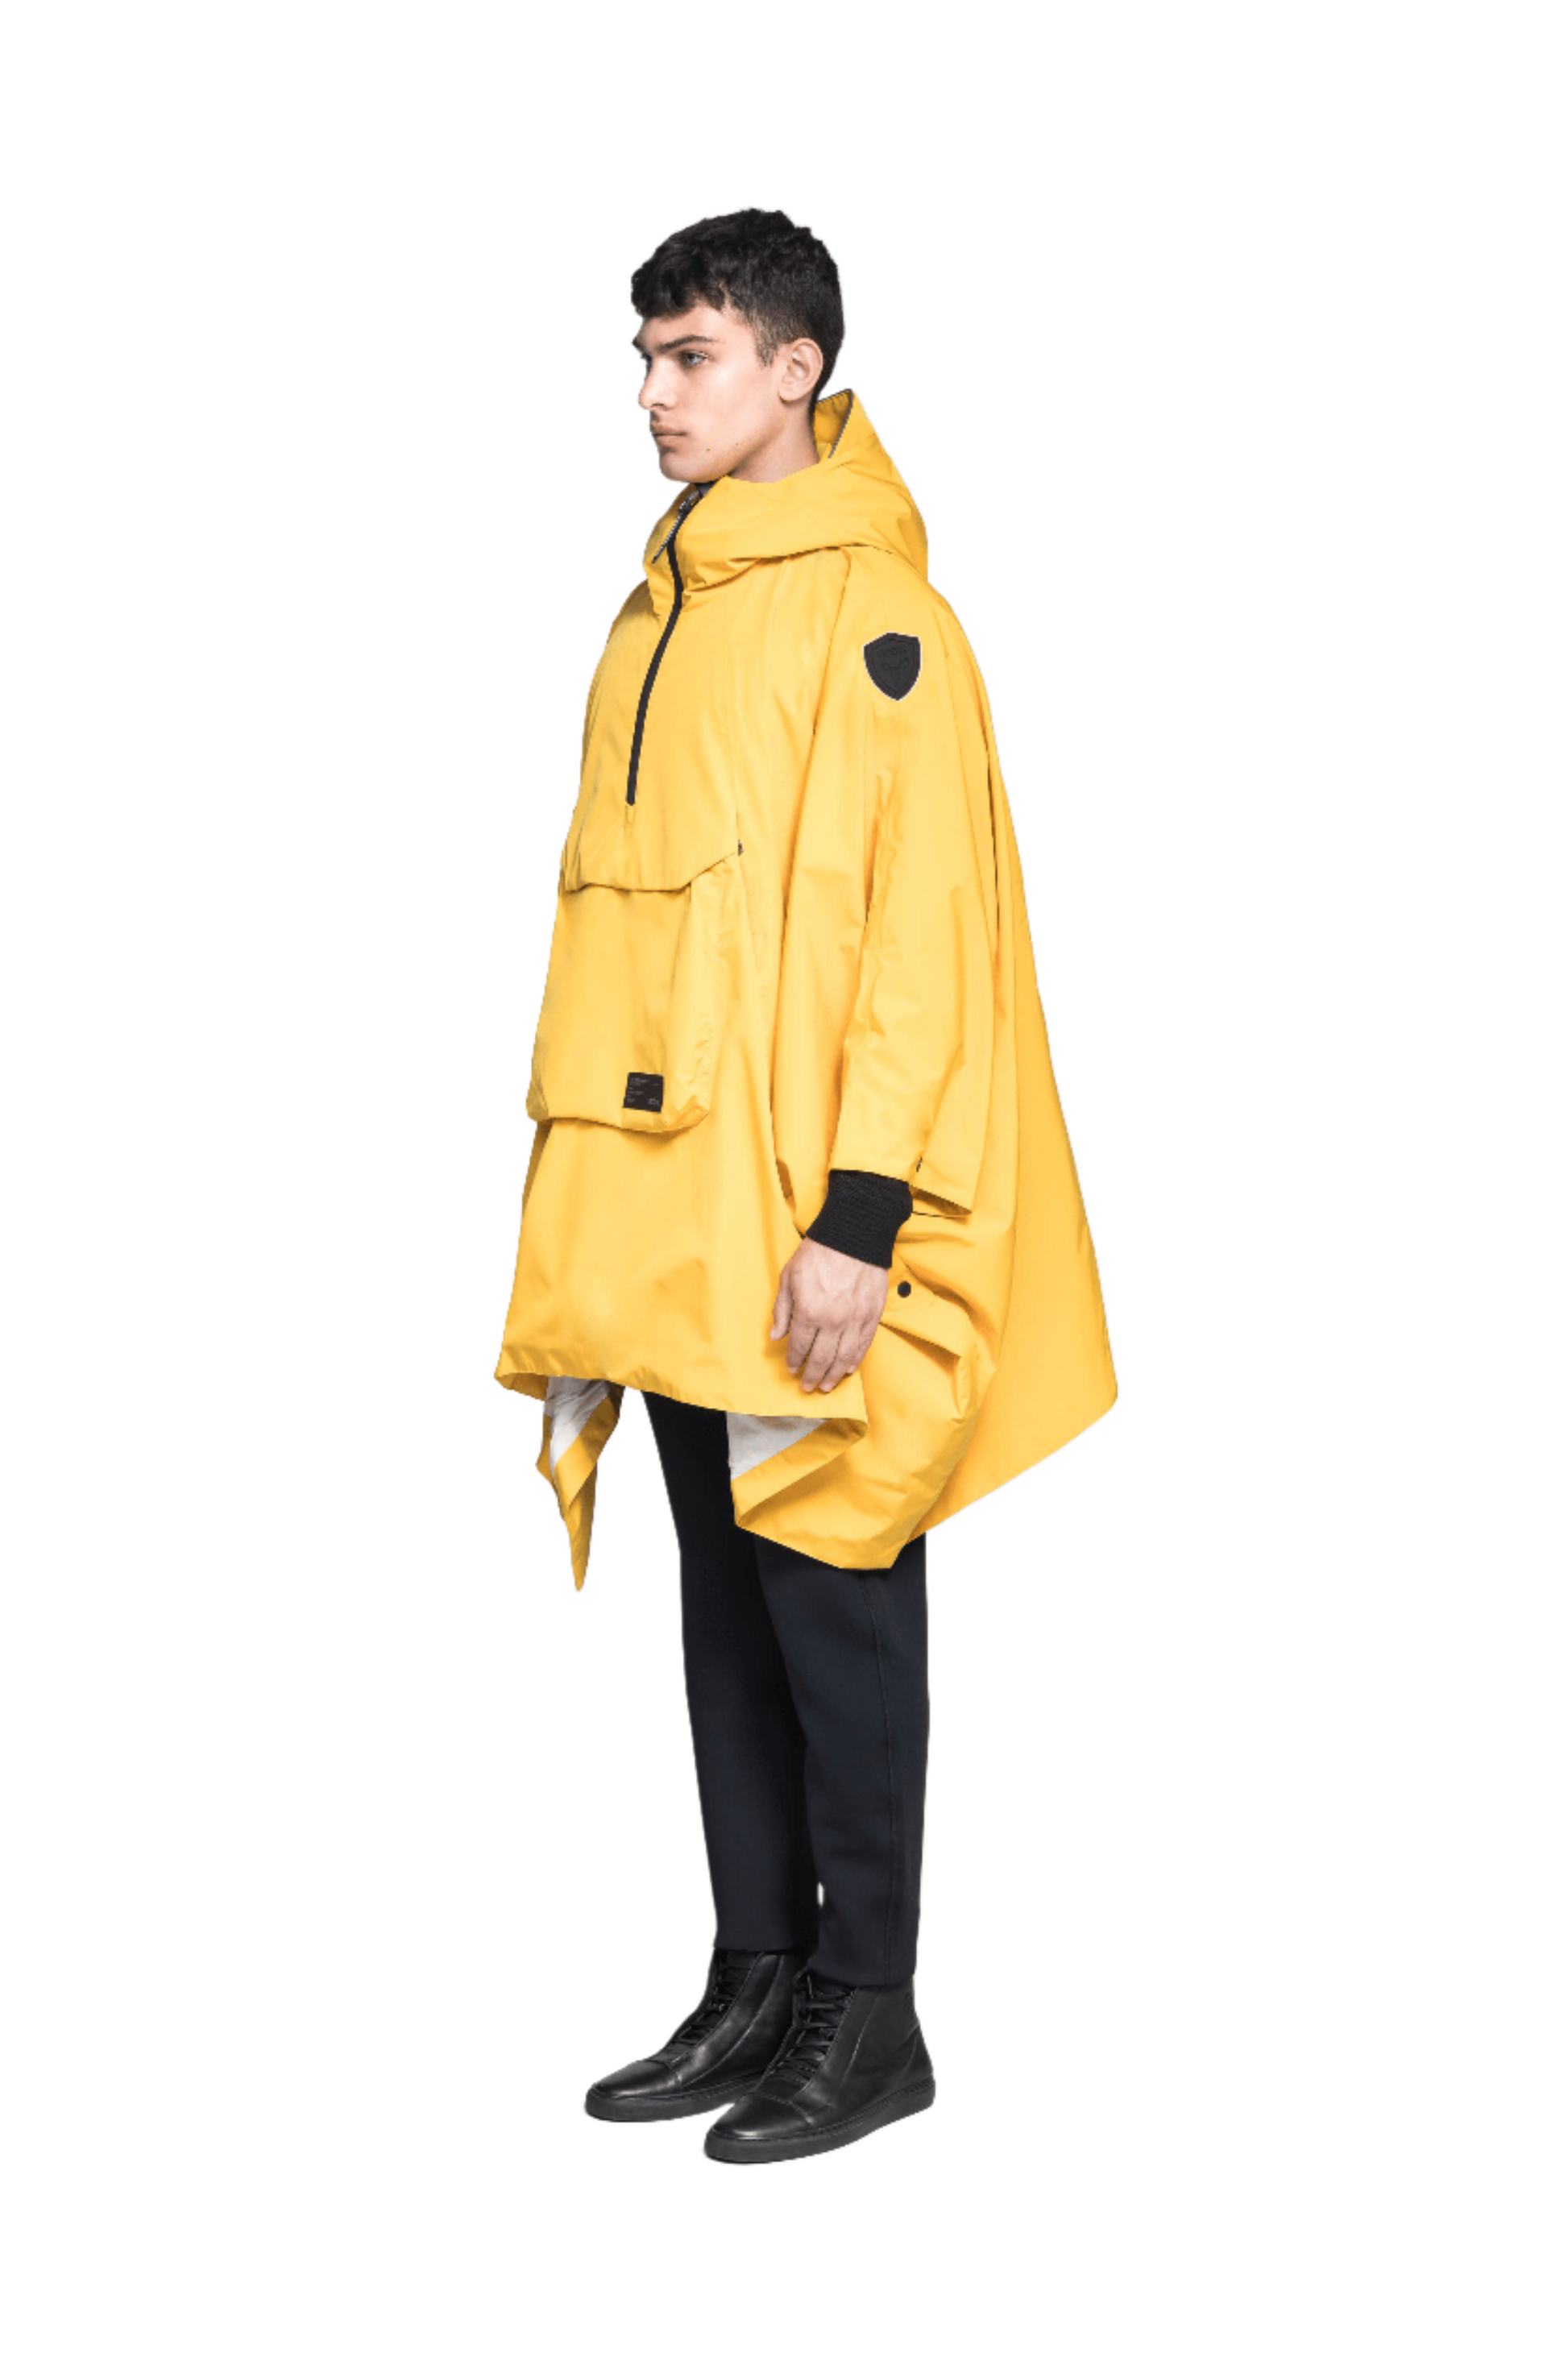 Hydra Unisex Performance Poncho in thigh length, non-removable hood, vertical half-zipper along centre front collar, hidden side-entry waist zipper pockets, adjustable webbing straps and snap closure cuffs, and packable to front kangaroo pocket with flap opening, in Old Gold